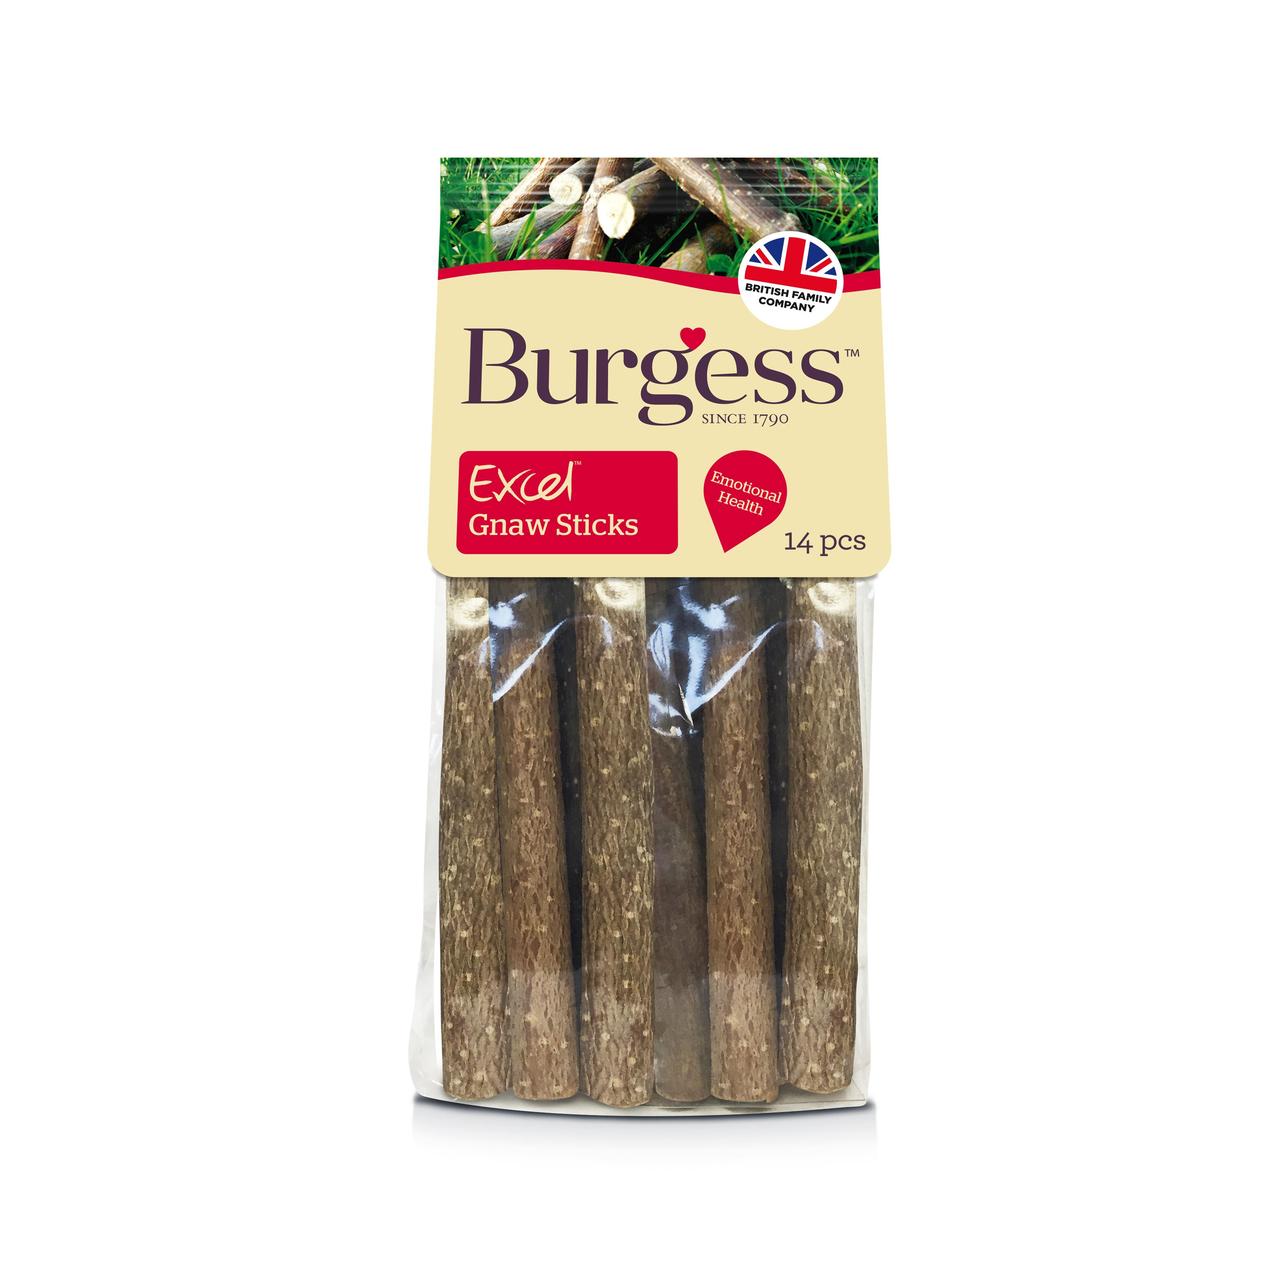 An image of Burgess Excel Natural Snacks Gnaw Sticks